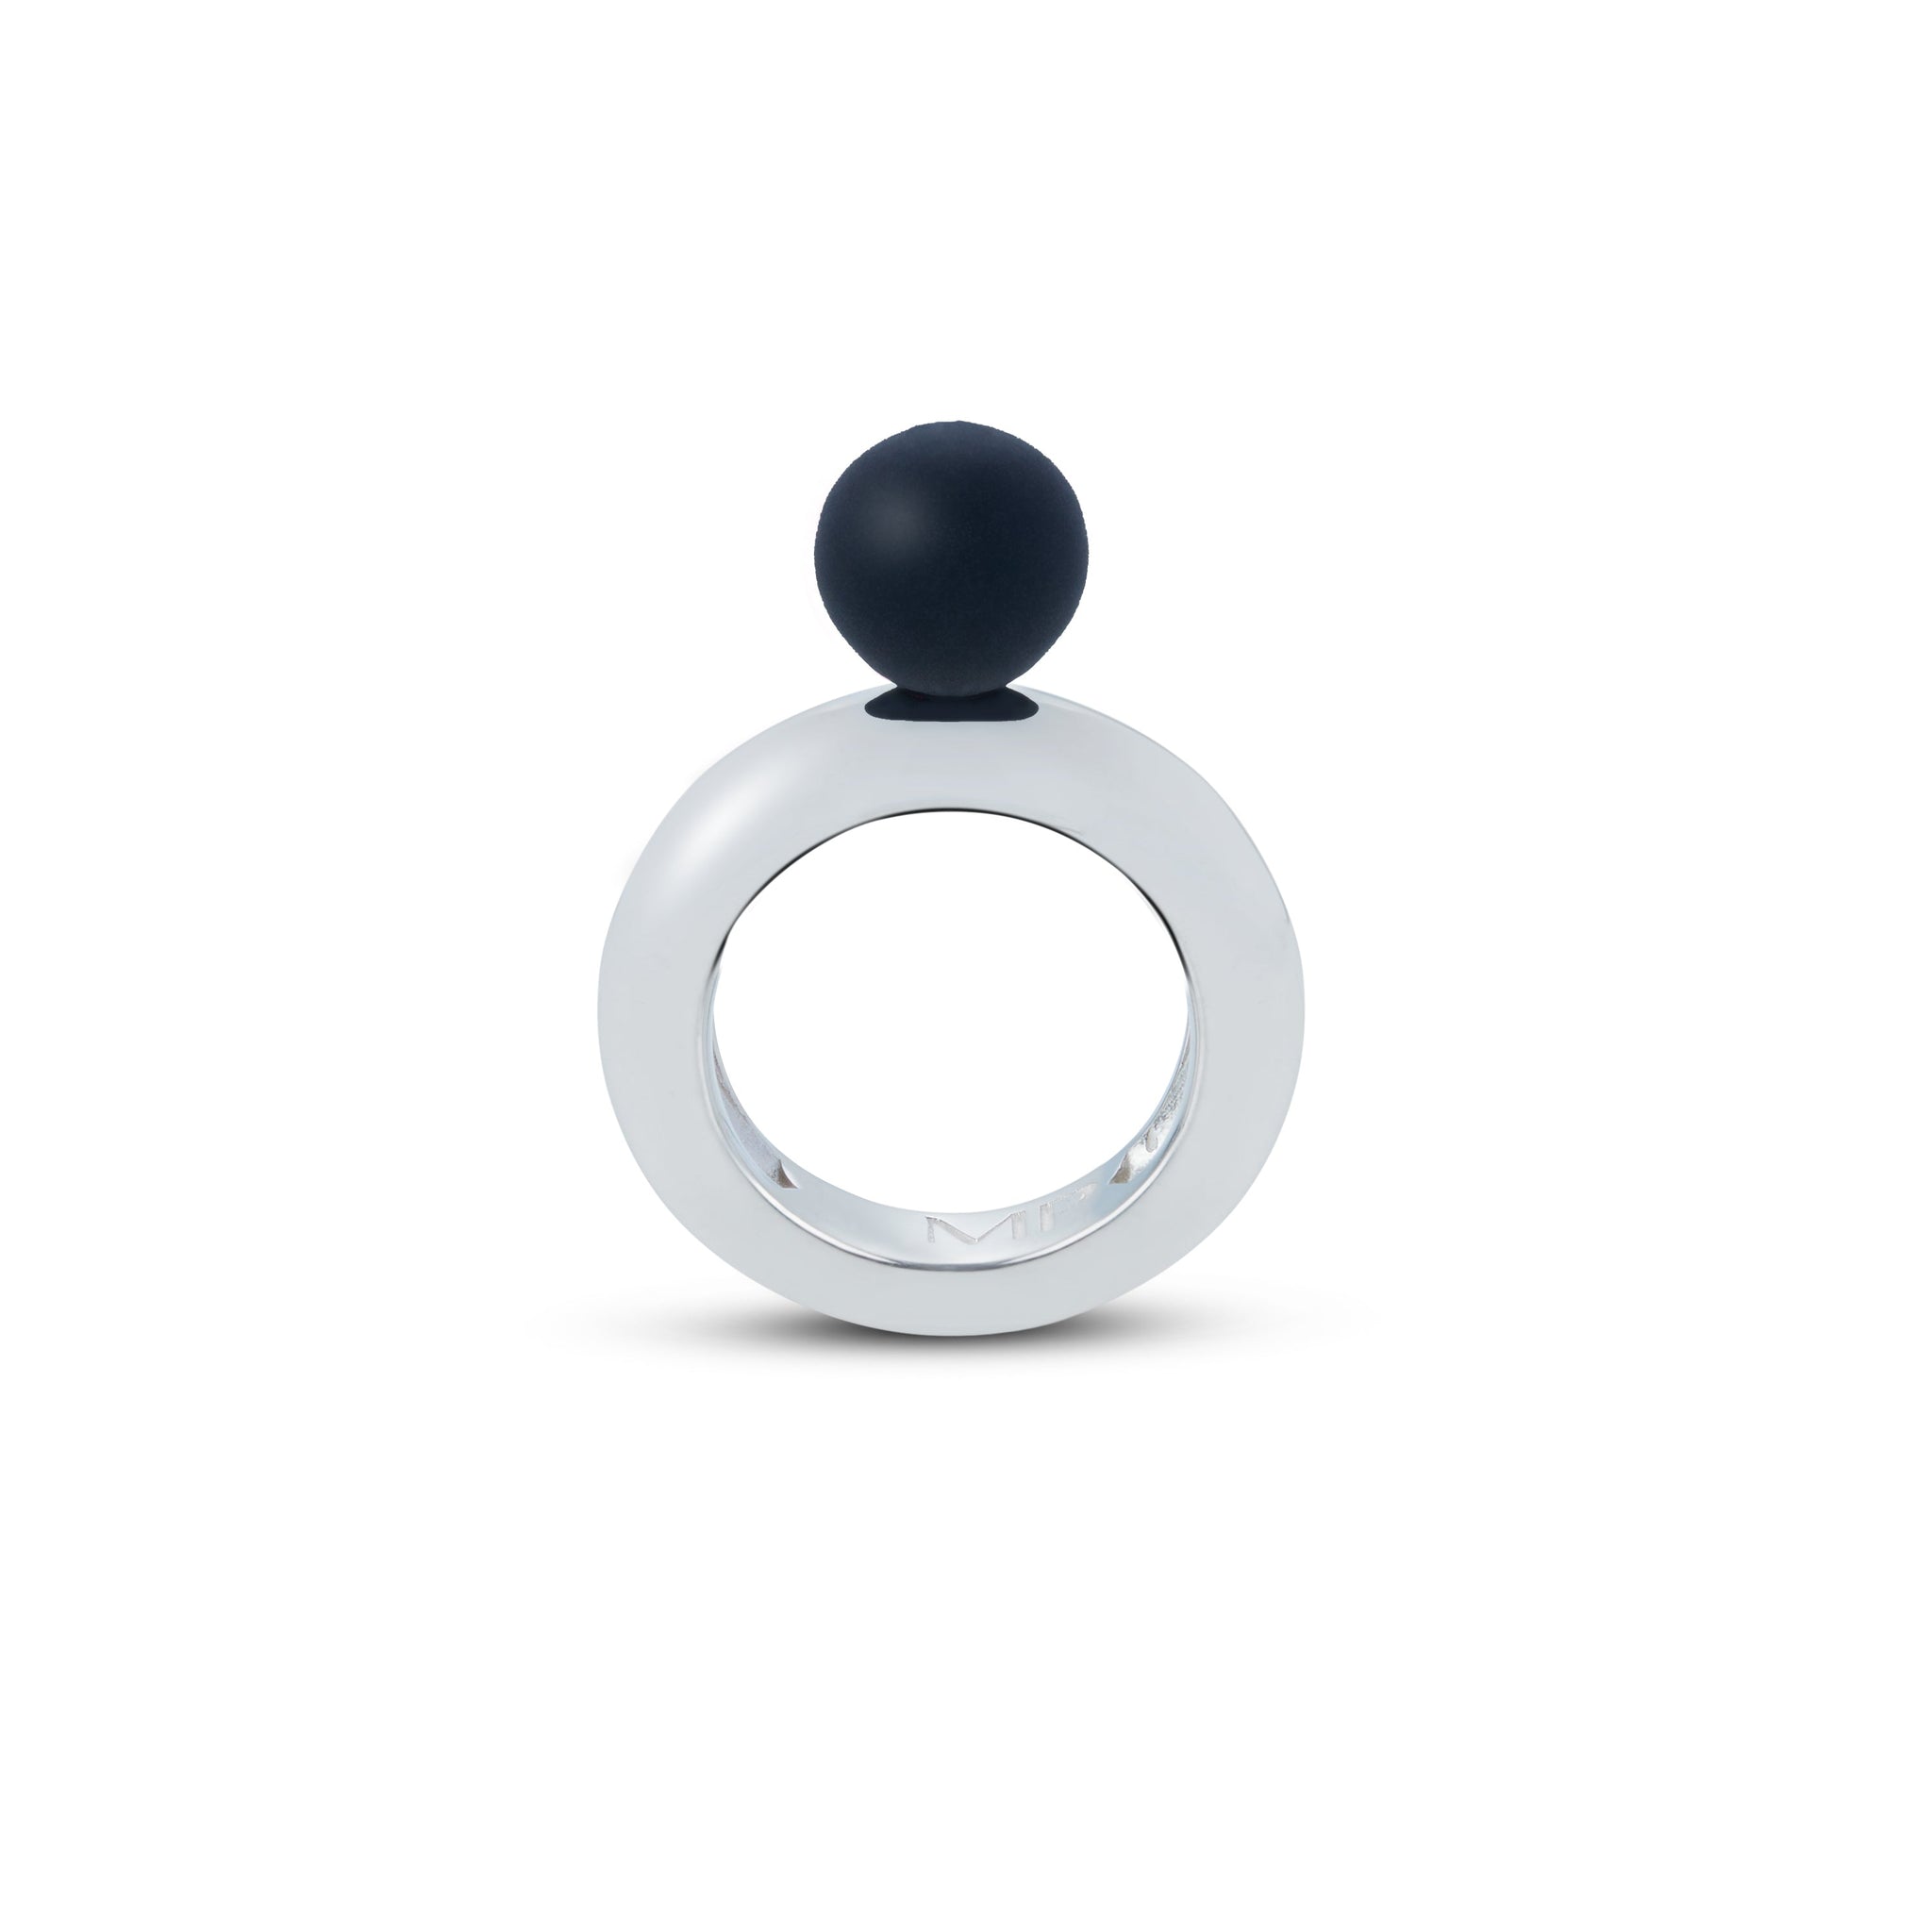 Madame Palm solitaire ring self-love in black silicone pearl and white gold 18kt band